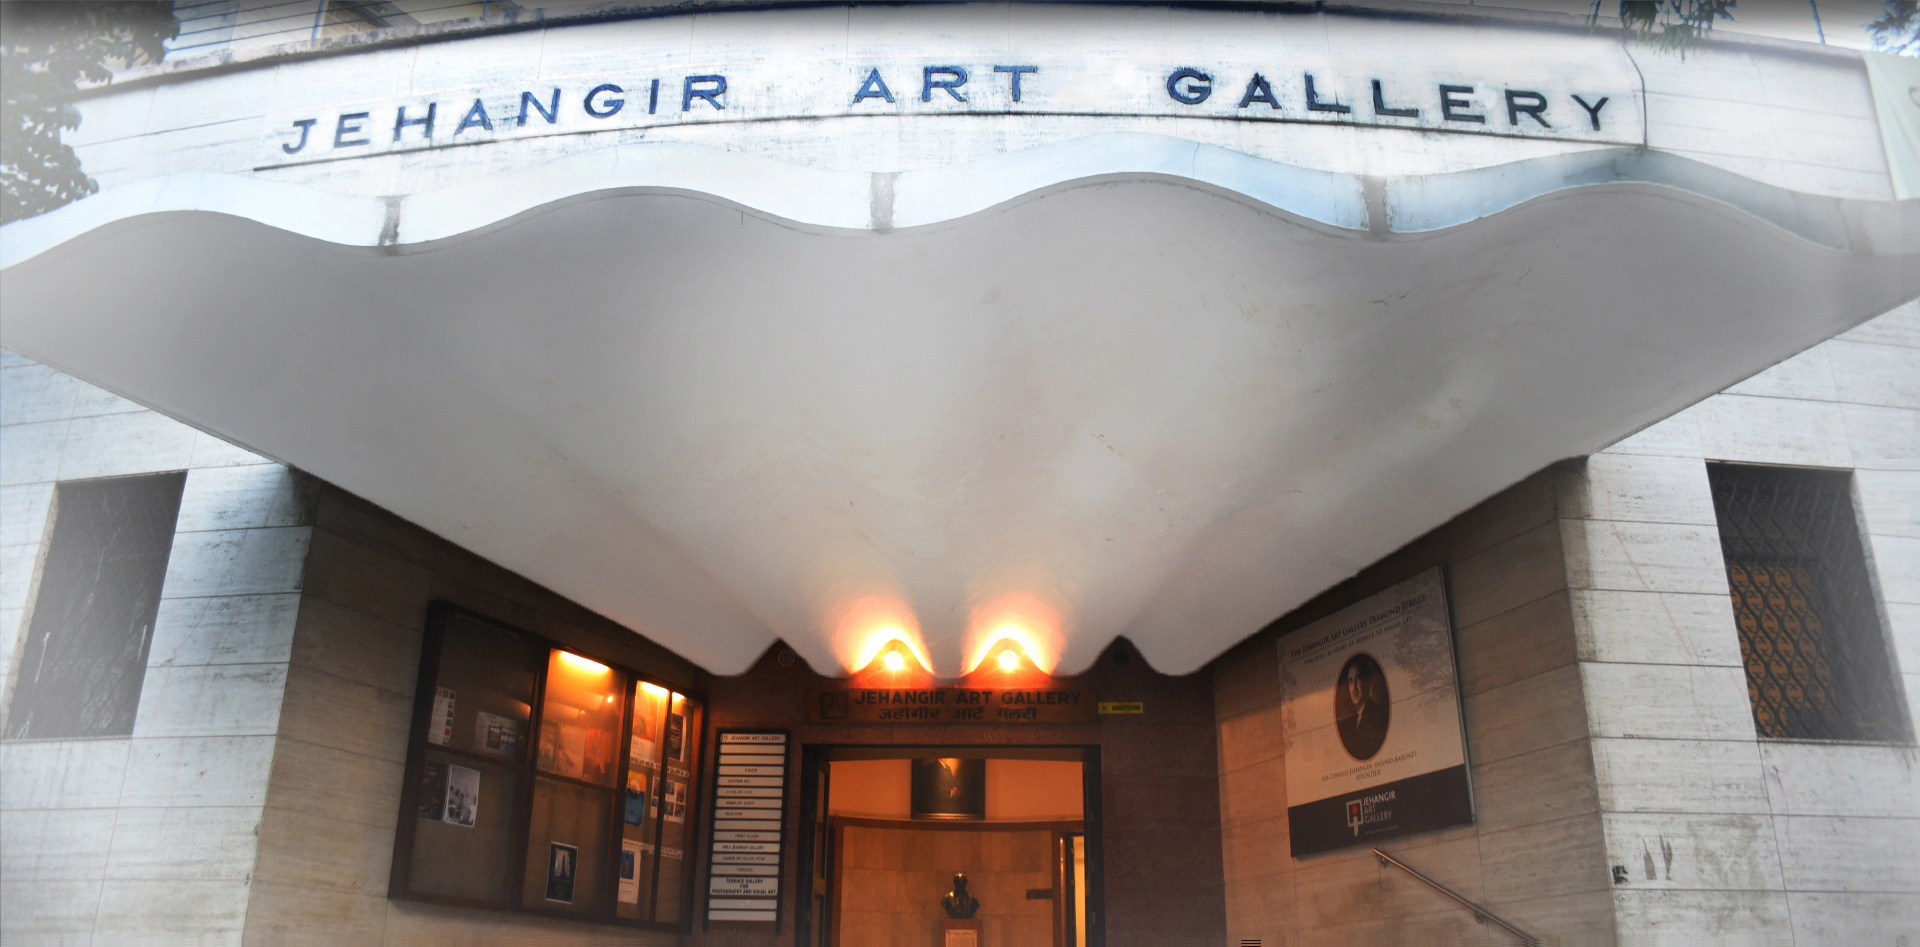 Art gallery showcasing diverse exhibits near Mumbai's sea view hotels, adding cultural charm to the vibrant city